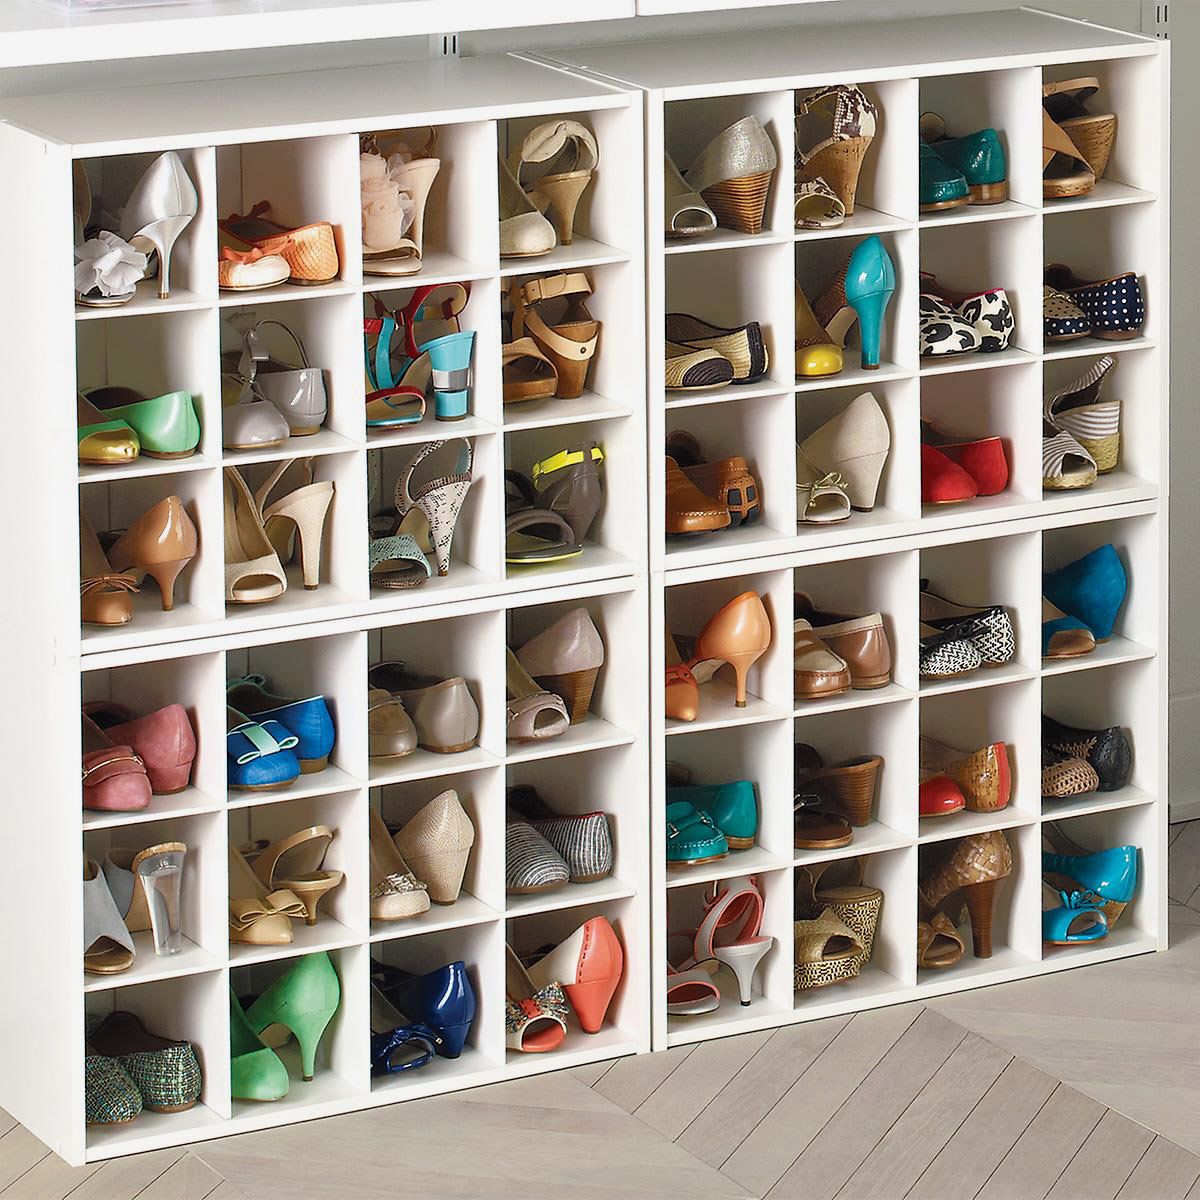 28 Best Shoe Organizers 2021 The Strategist New York Magazine Great savings free delivery / collection on many items. 28 best shoe organizers 2021 the